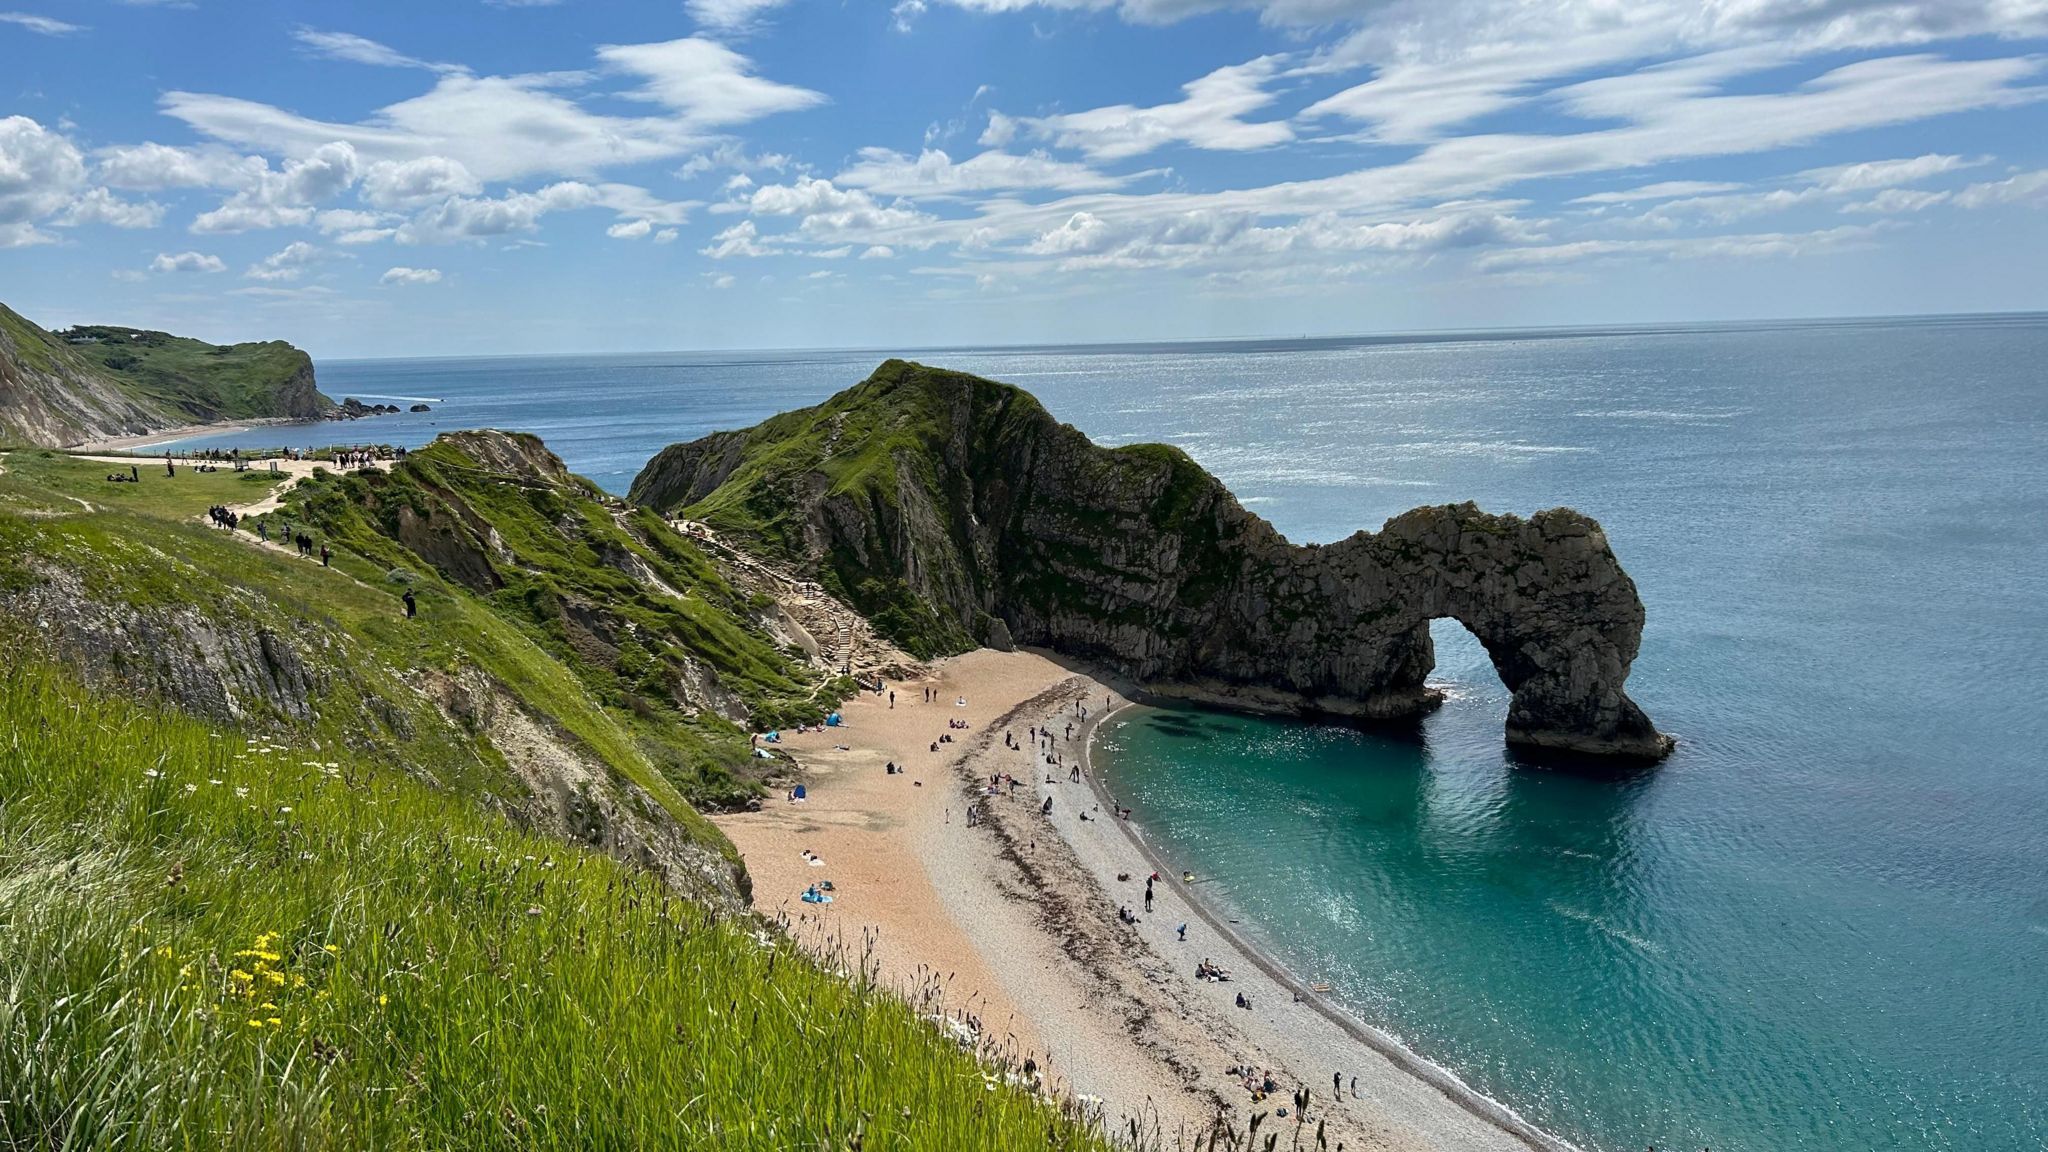 TUESDAY - A sunny day overlooking the natural arch at Durdle Door with people lying on the beach